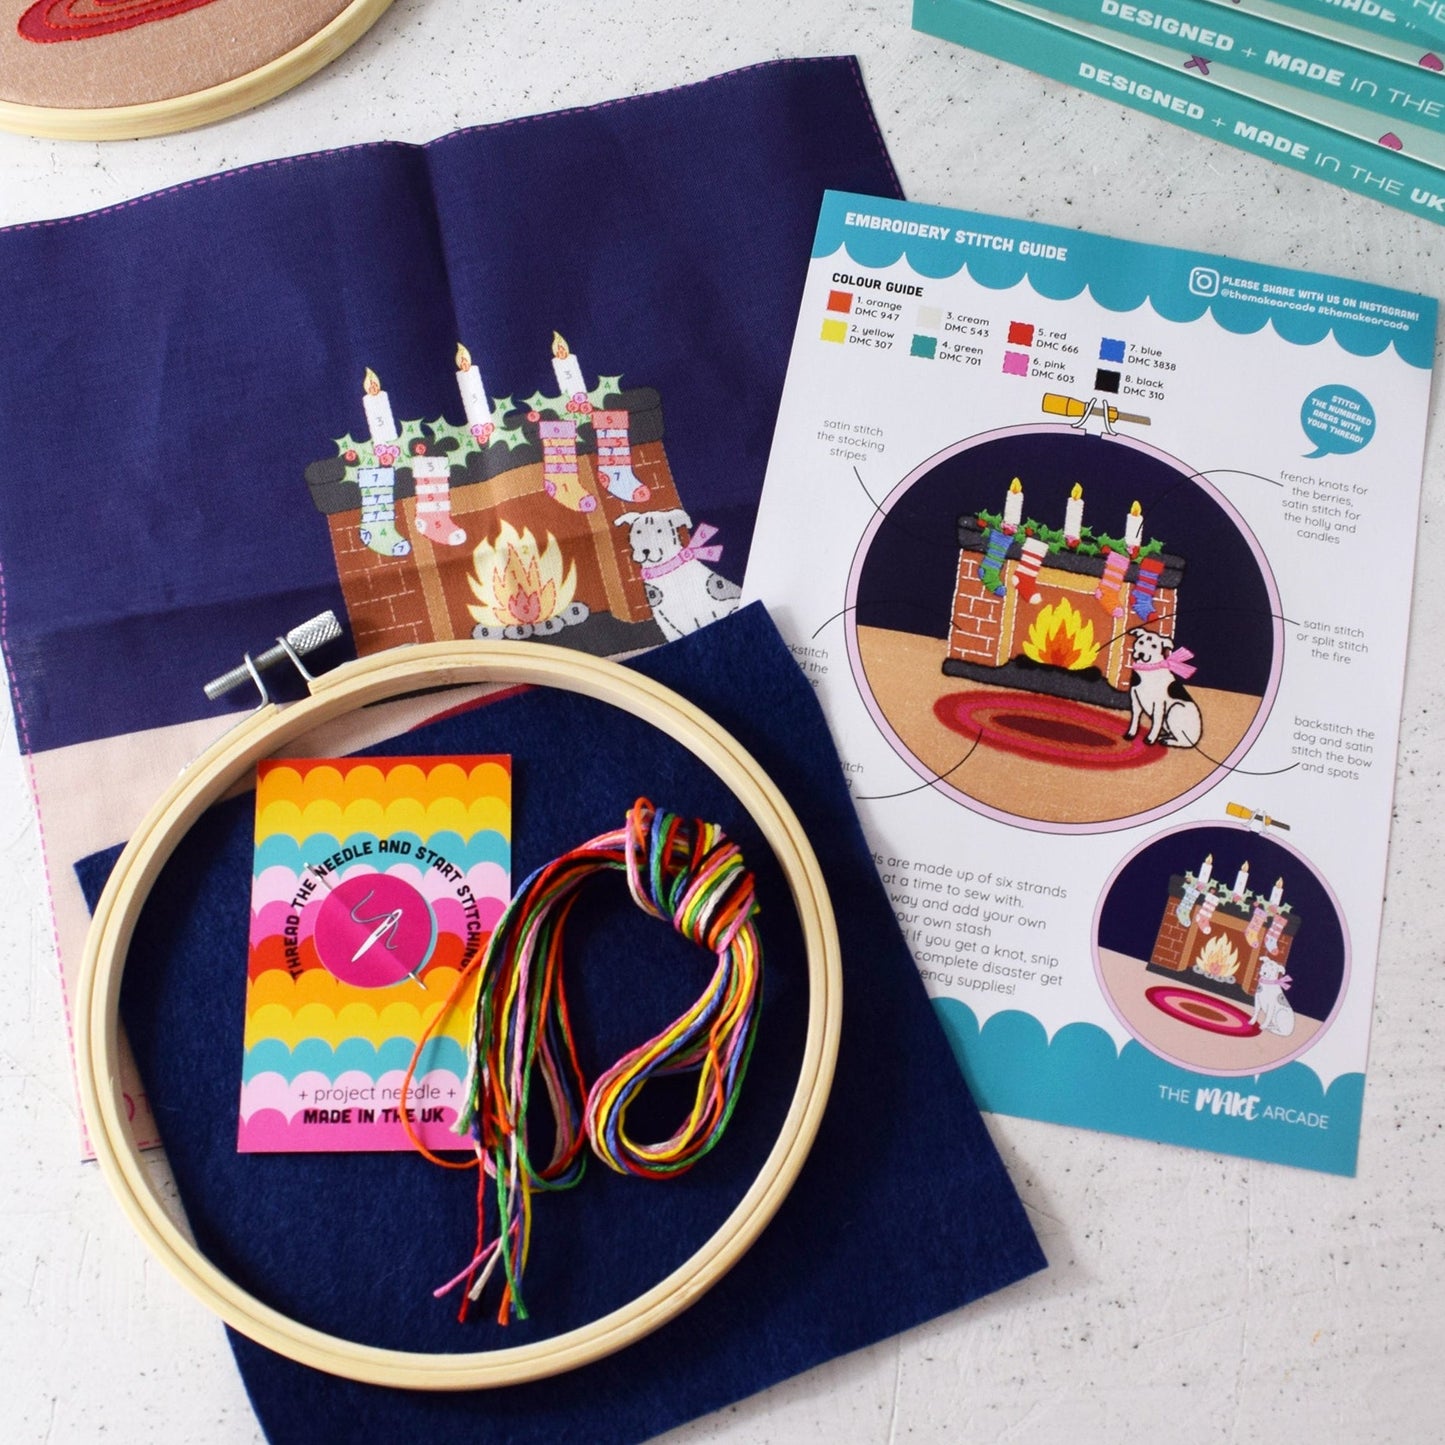 'Fireplace' Large Embroidery Kit